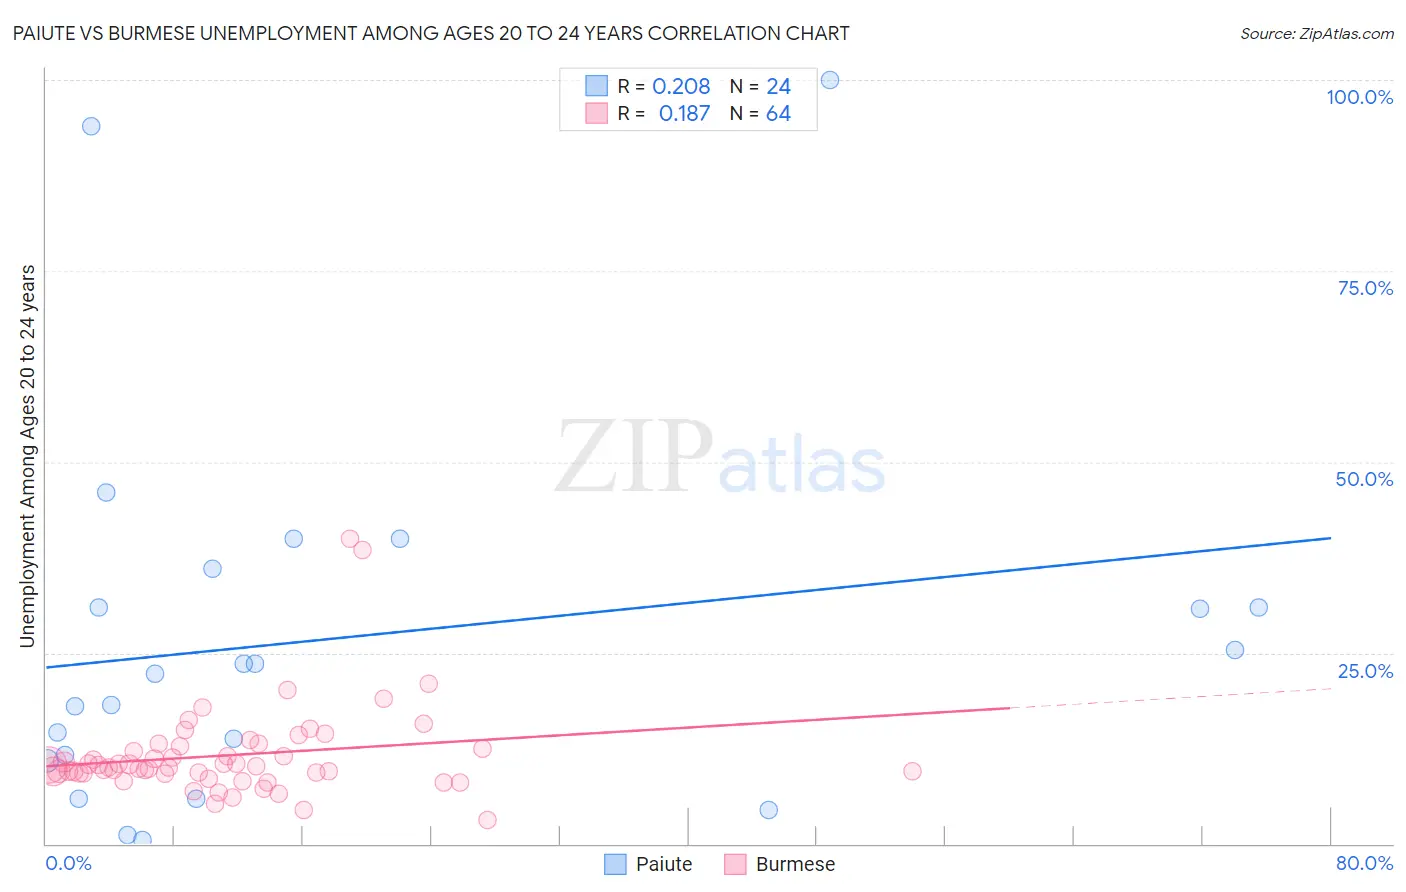 Paiute vs Burmese Unemployment Among Ages 20 to 24 years